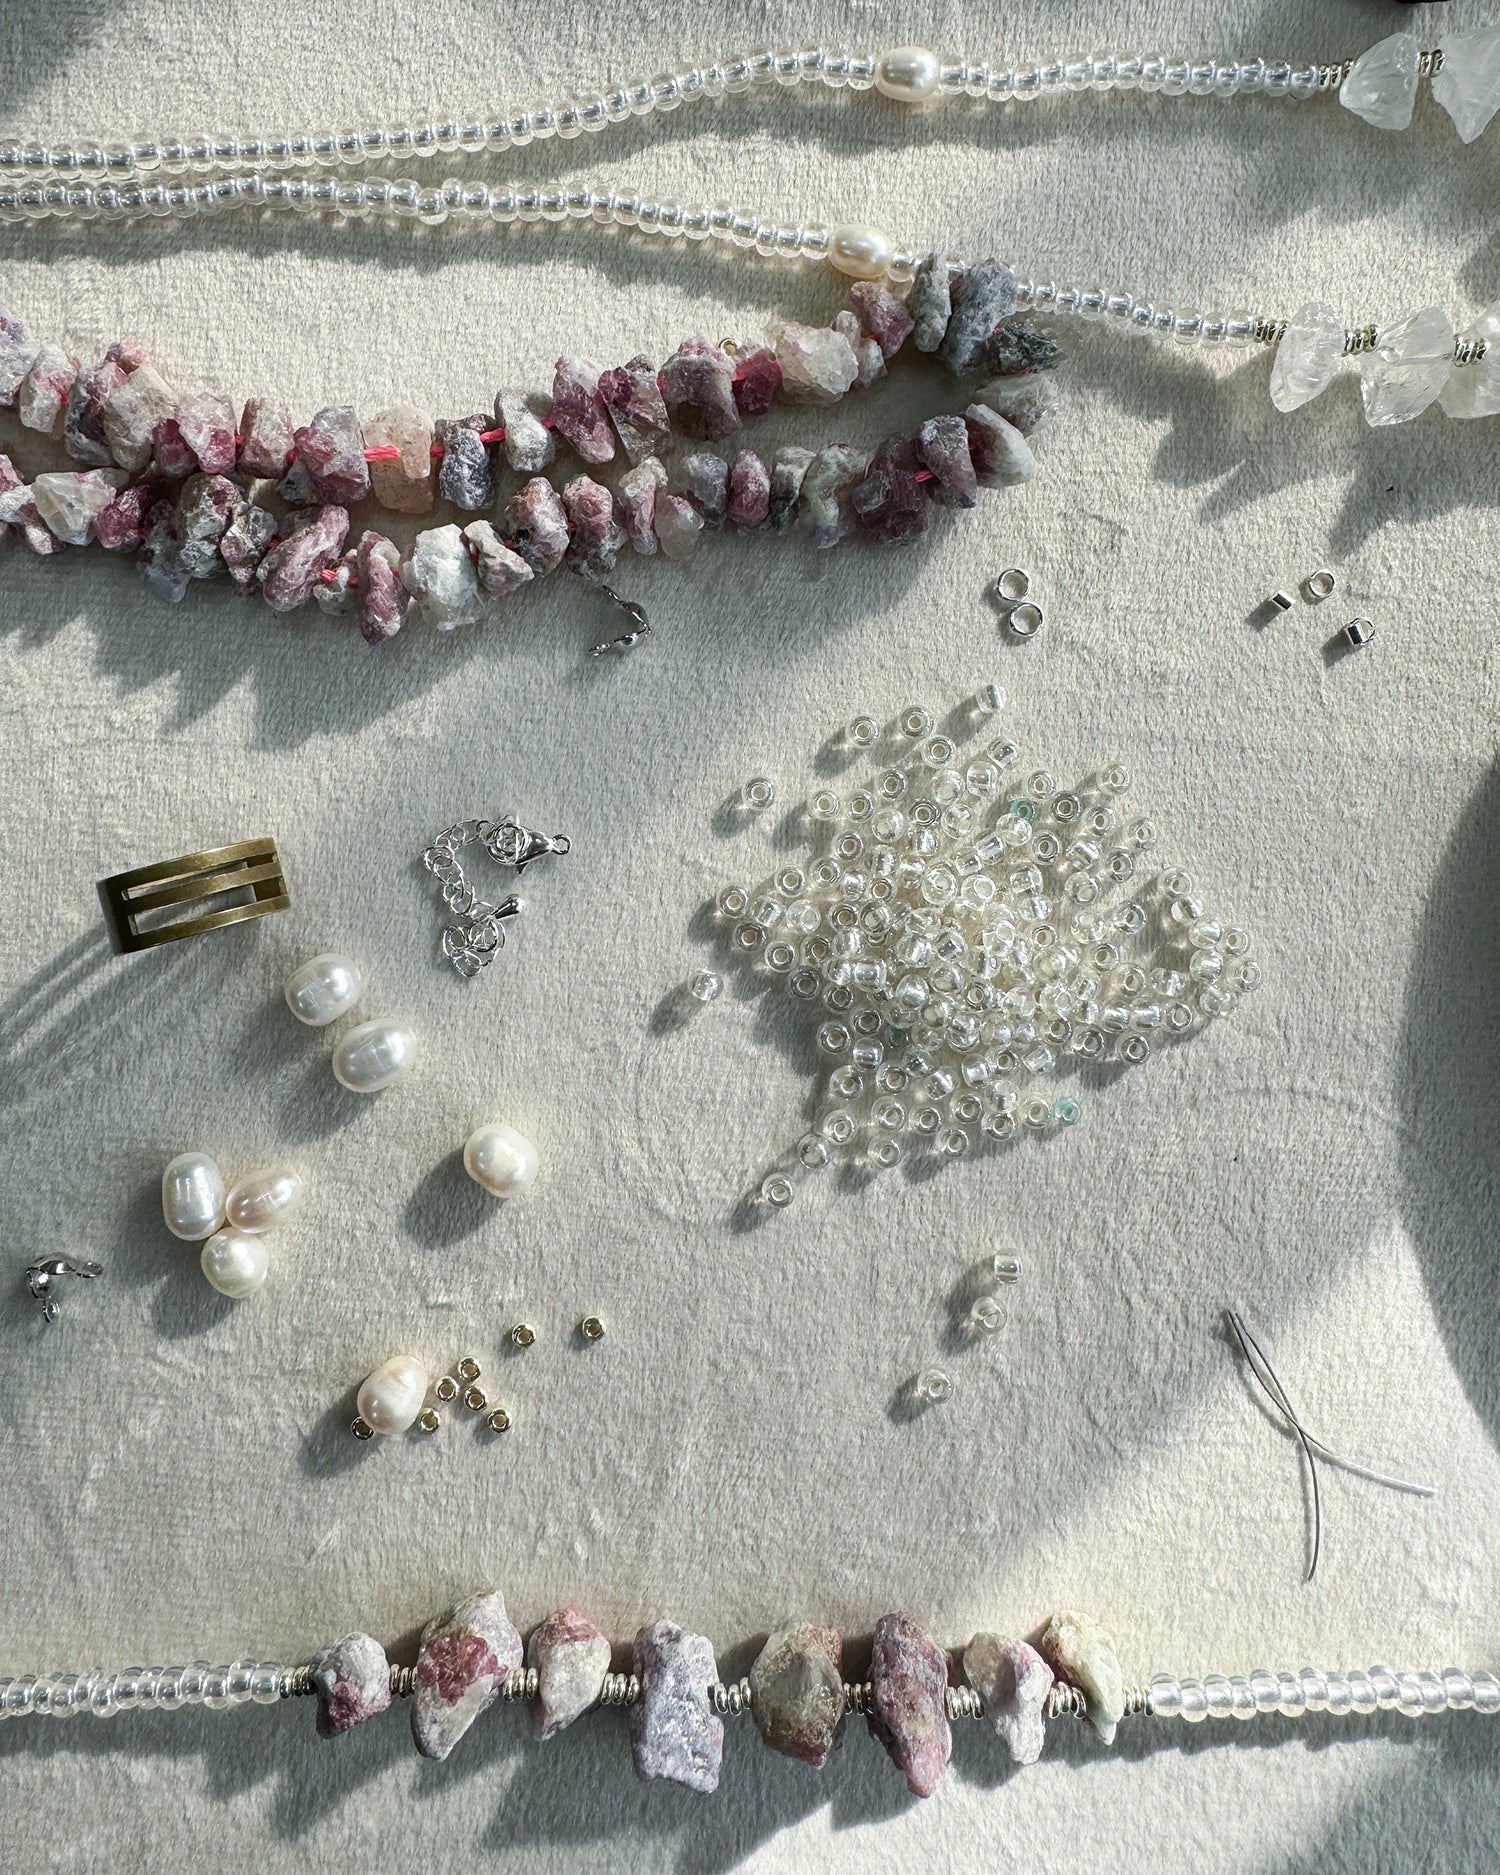 Harmonizing Crystals and Beads: Crafting Natural Beauty